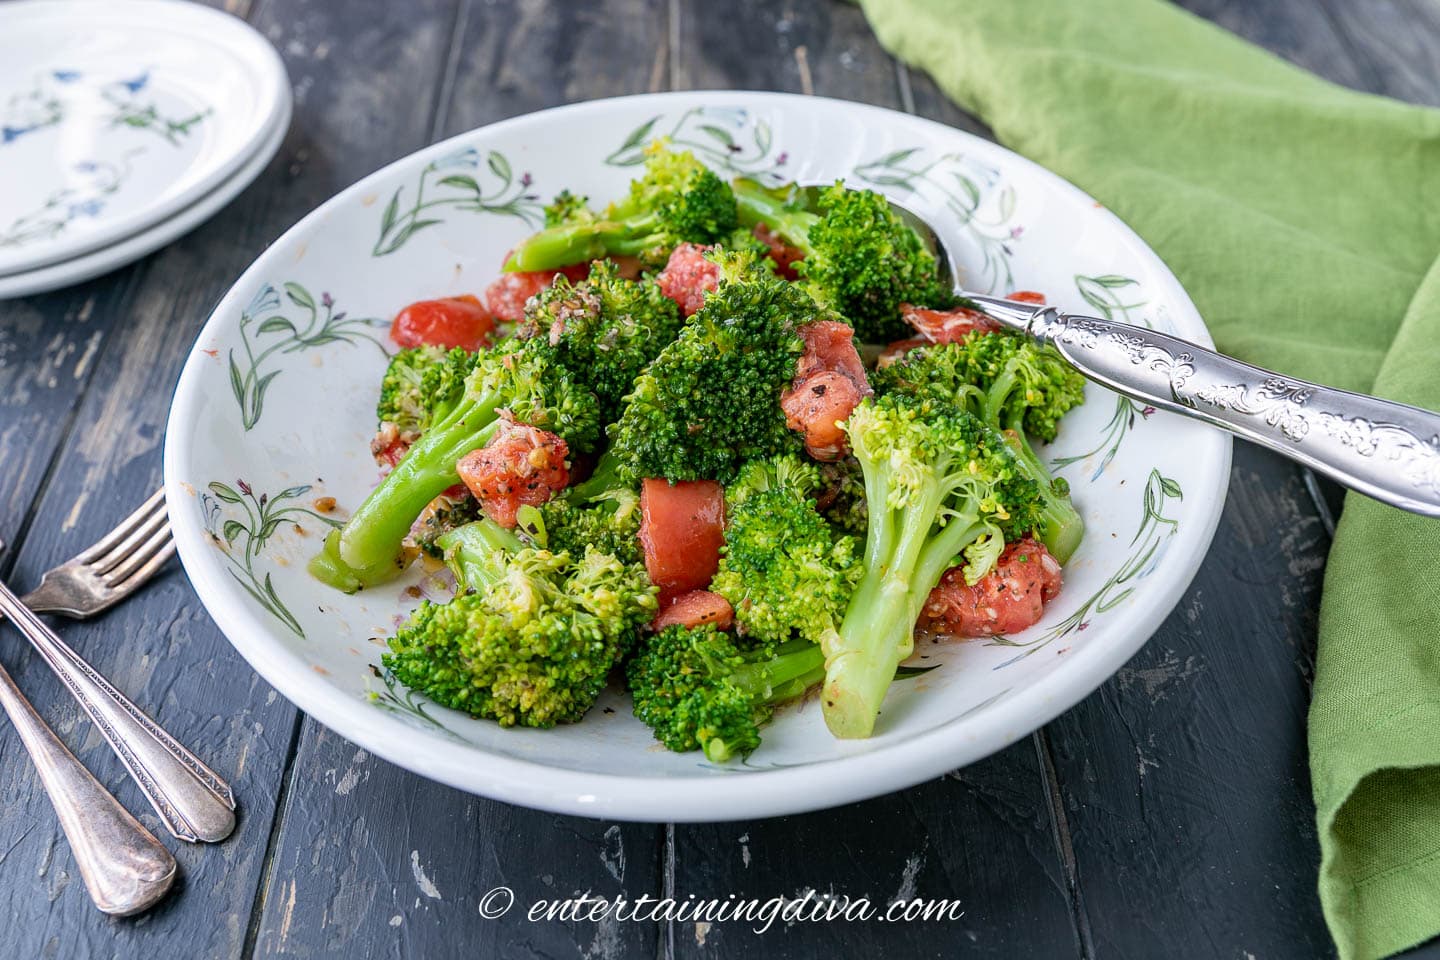 microwaved broccoli with tomatoes and spices on a table ready to be served